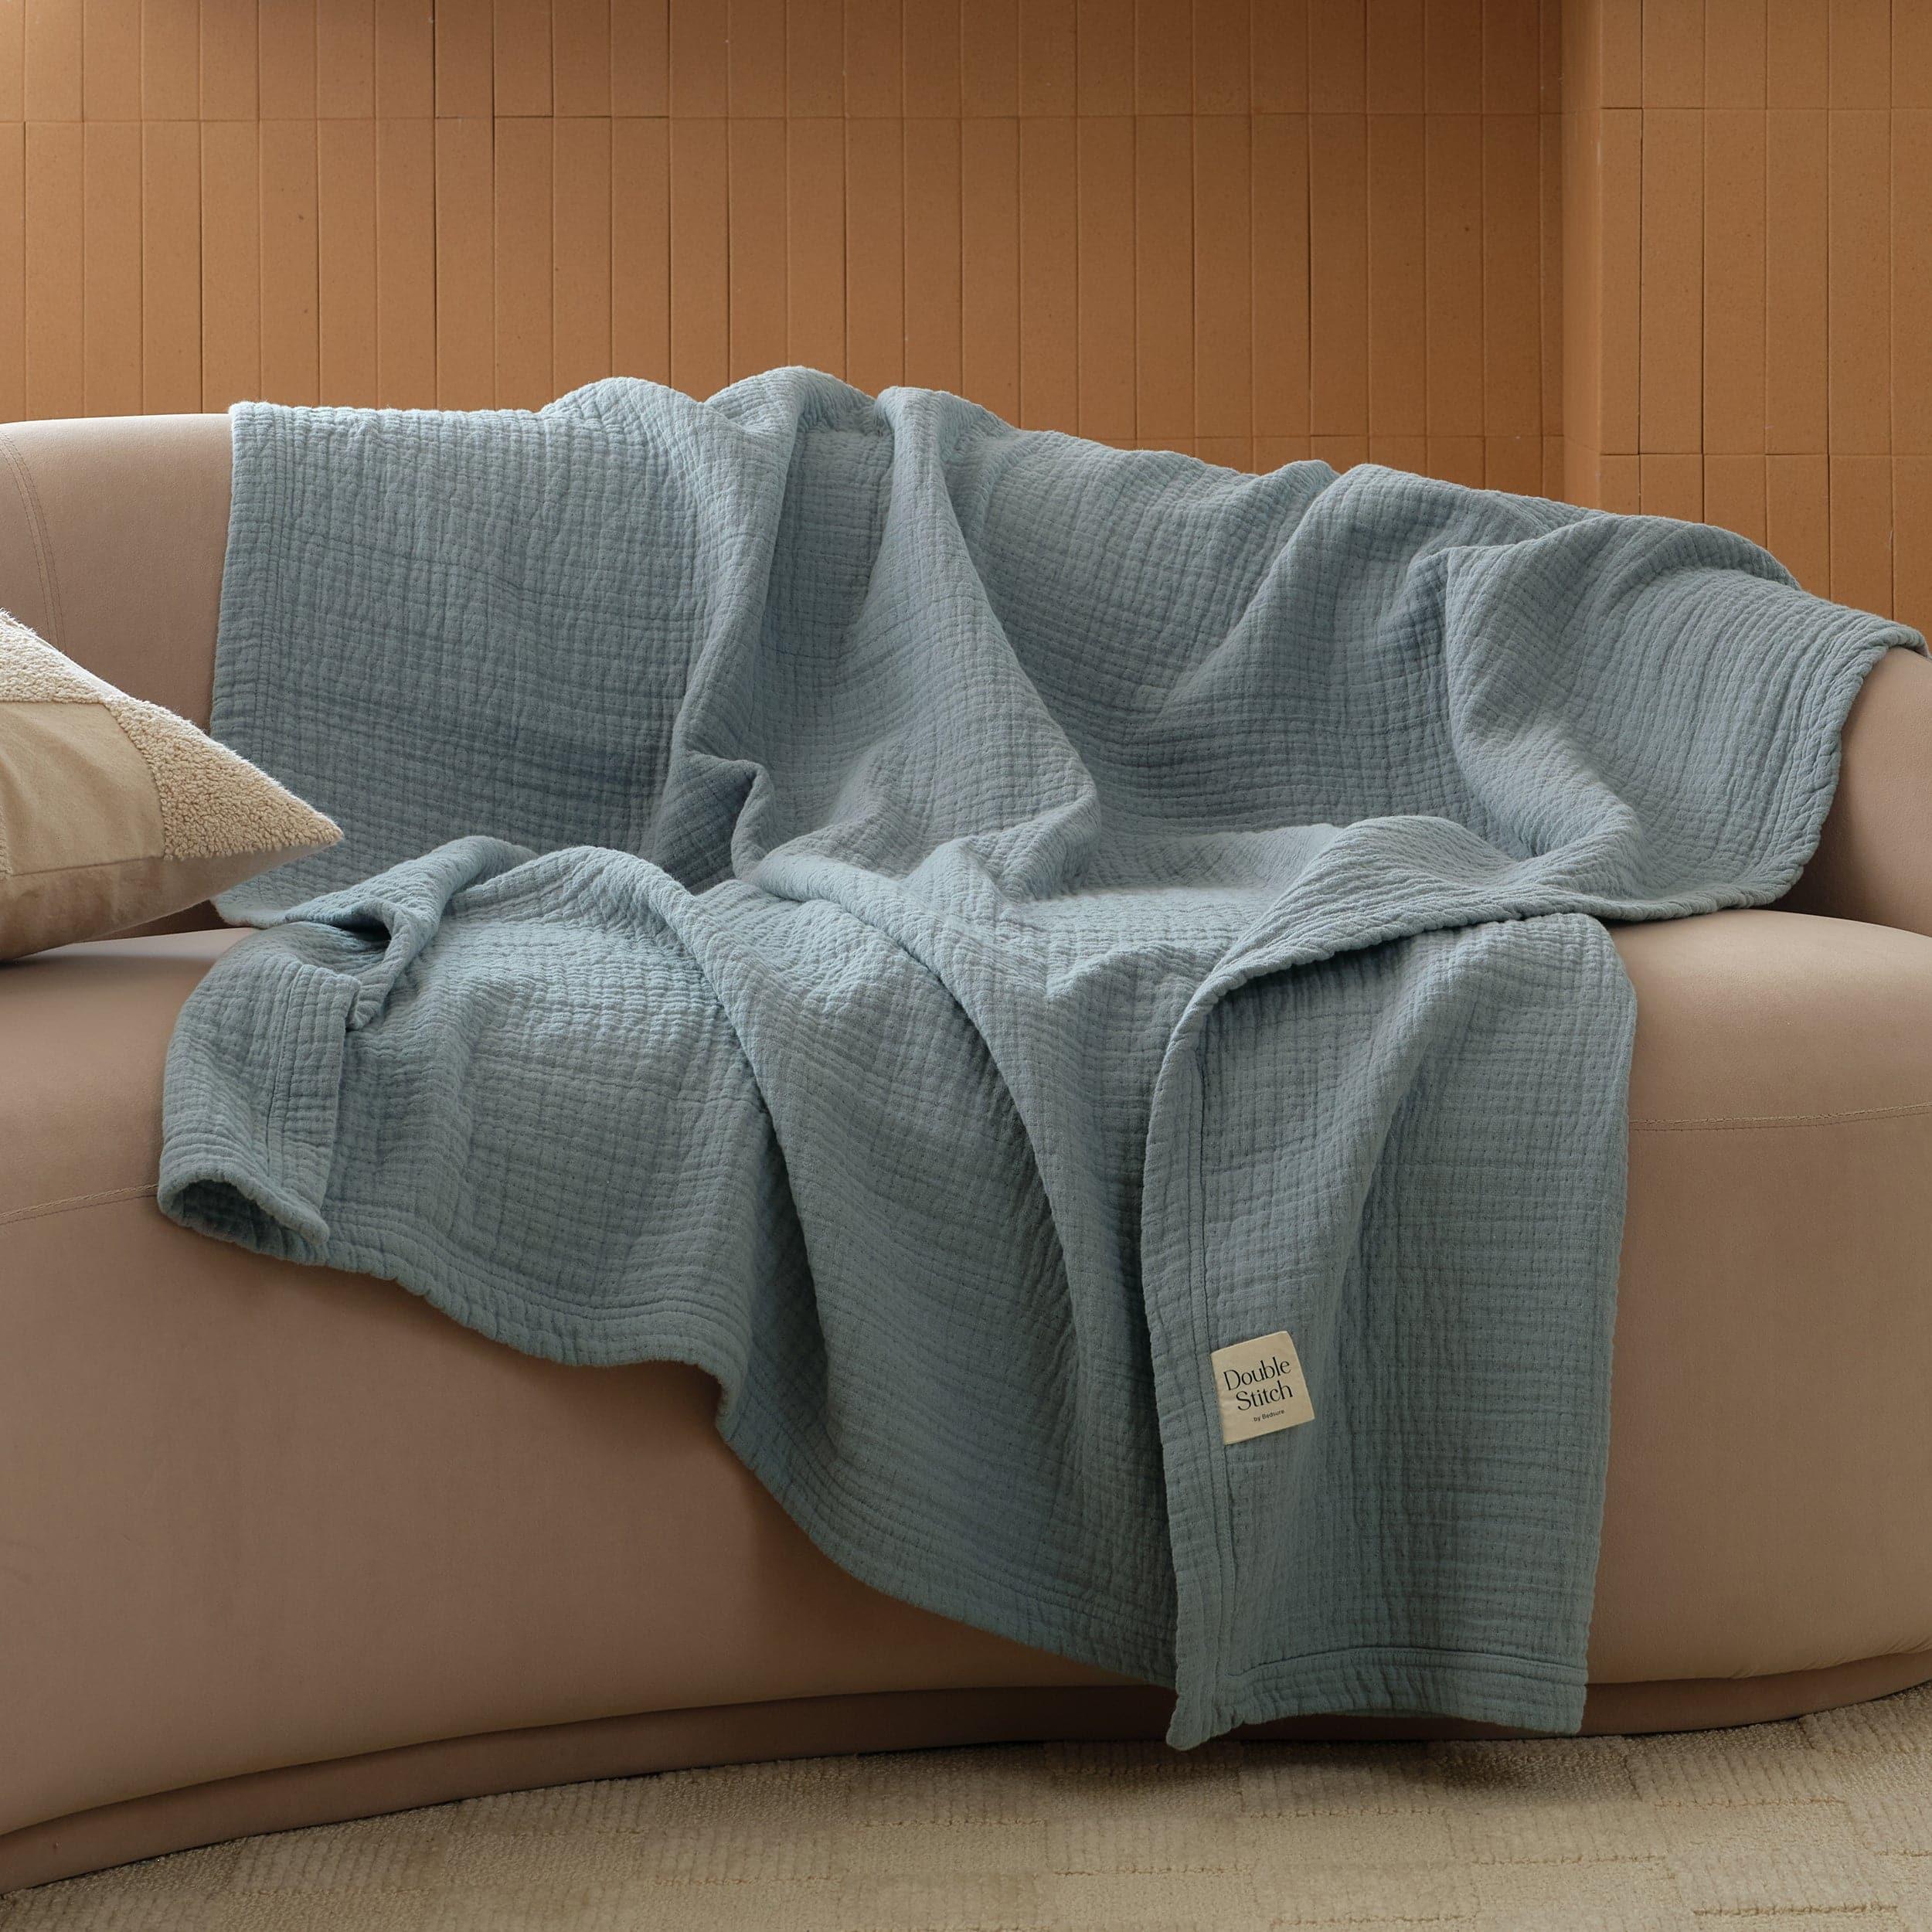 The knit throw blanket is ideal for taking on picnics or outdoor gatherings.